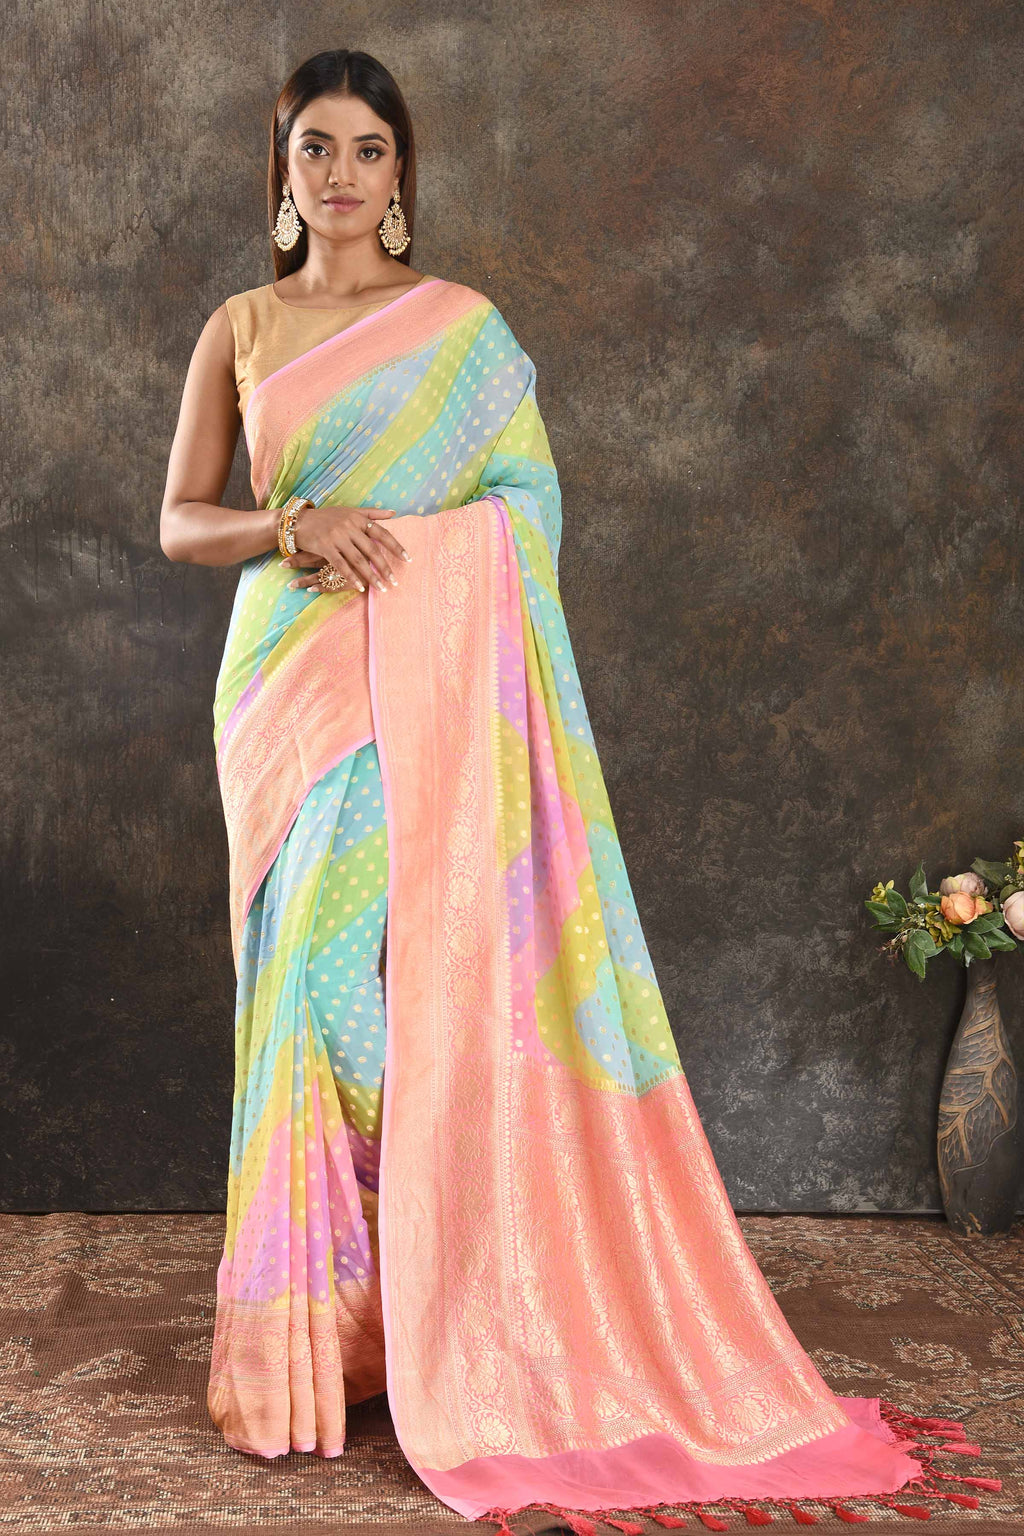 Buy pastel green and blue georgette Banarasi saree online in USA with pink zari border. Be vision of elegance on special occasions in exquisite designer sarees, handwoven sarees, georgette sarees, embroidered sarees, Banarasi sarees from Pure Elegance Indian saree store in USA.-full view